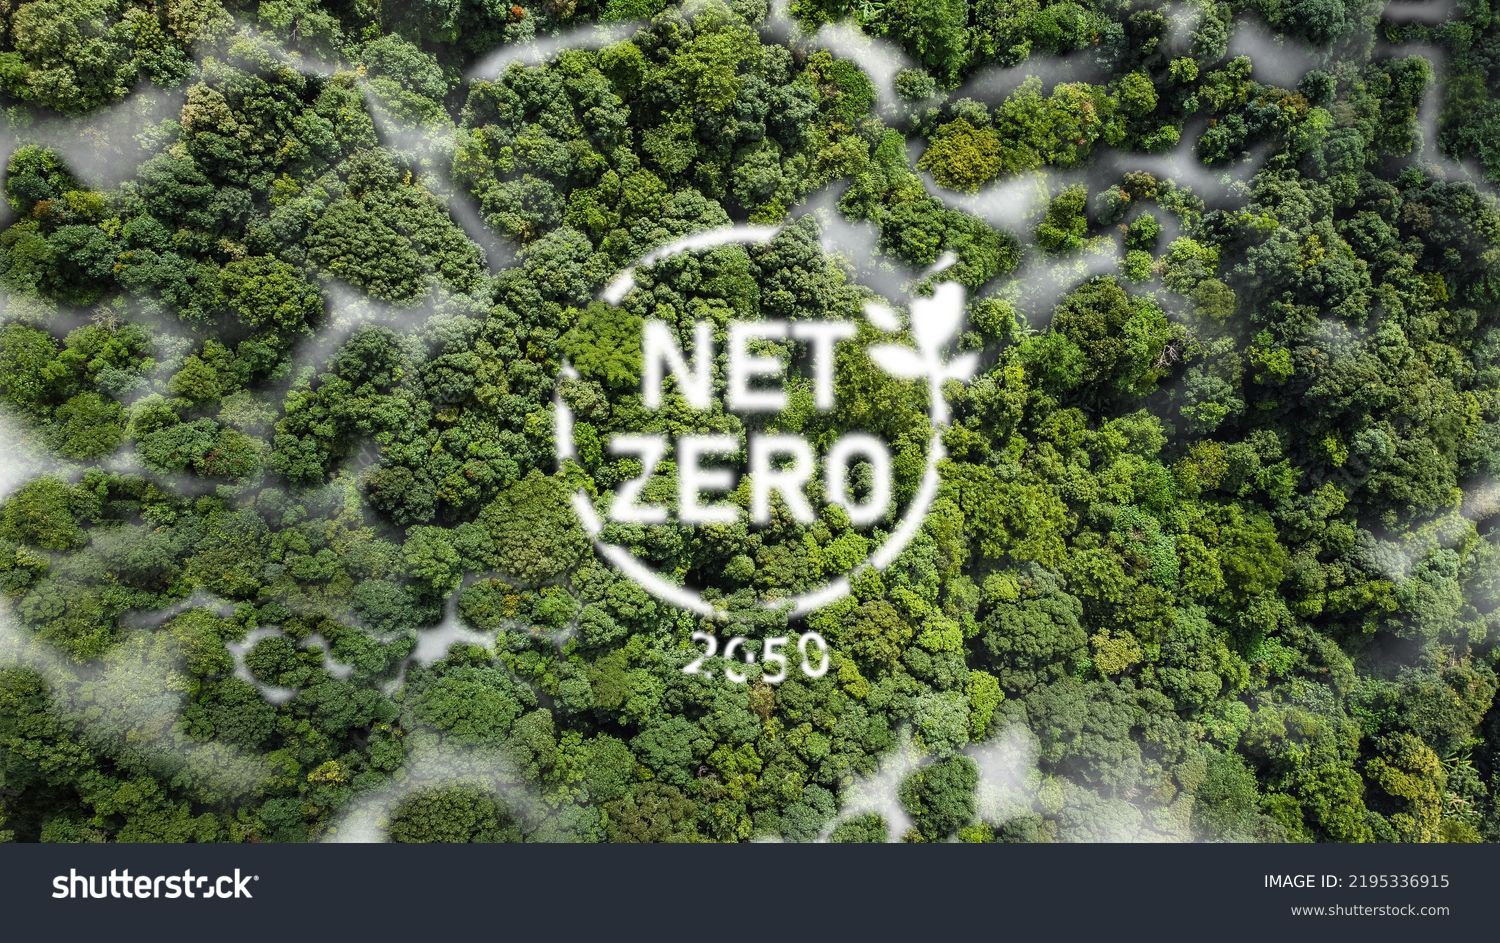 Net Zero 2050 Carbon Neutral and Net Zero Concept natural environment A climate-neutral long-term strategy greenhouse gas emissions targets A cloud of mist in the green Net Zero figure. #2195336915